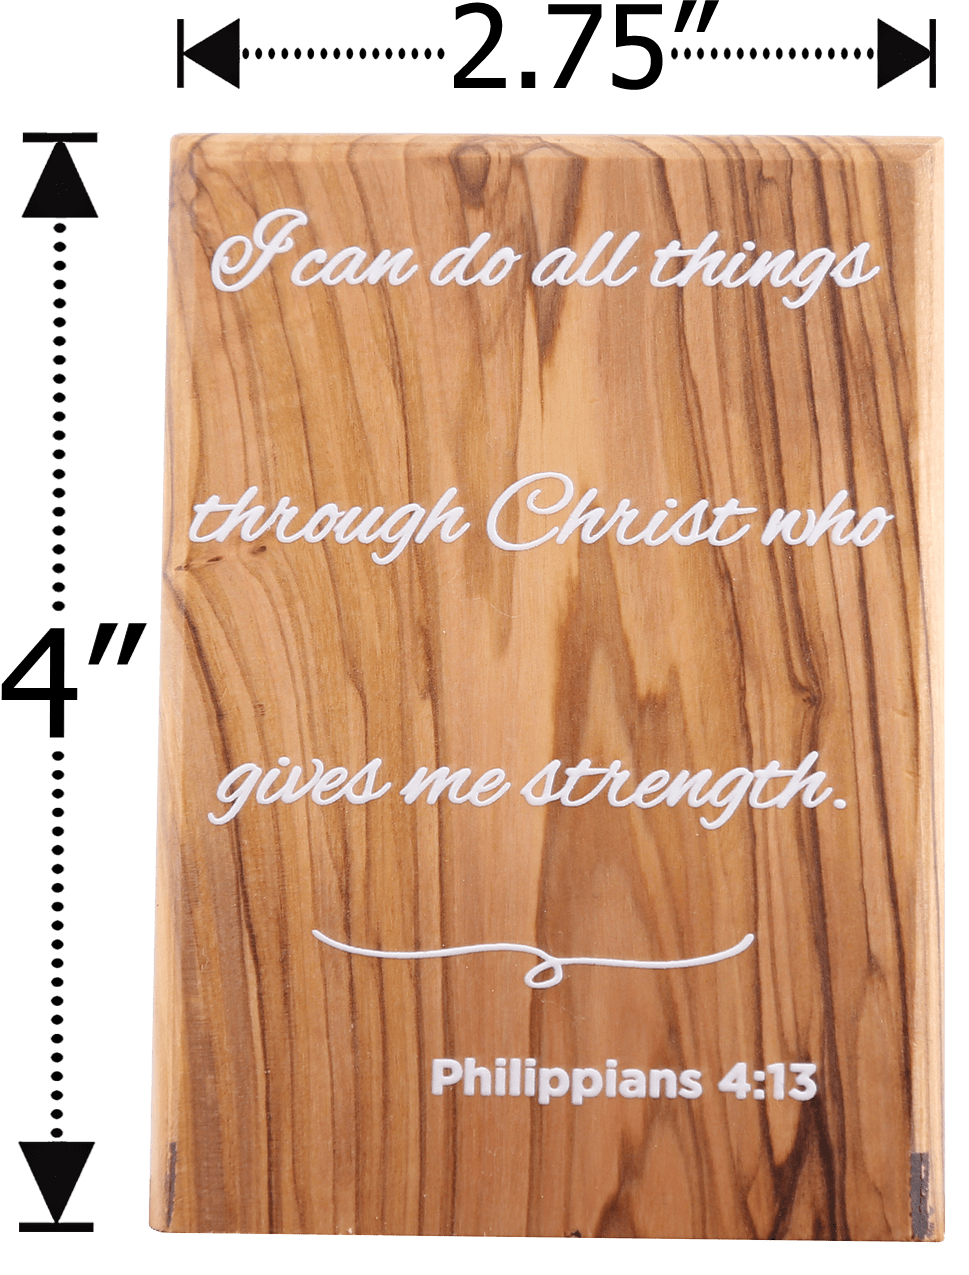 Olive Wood Plaque with White Print #3, Philippians 4:13